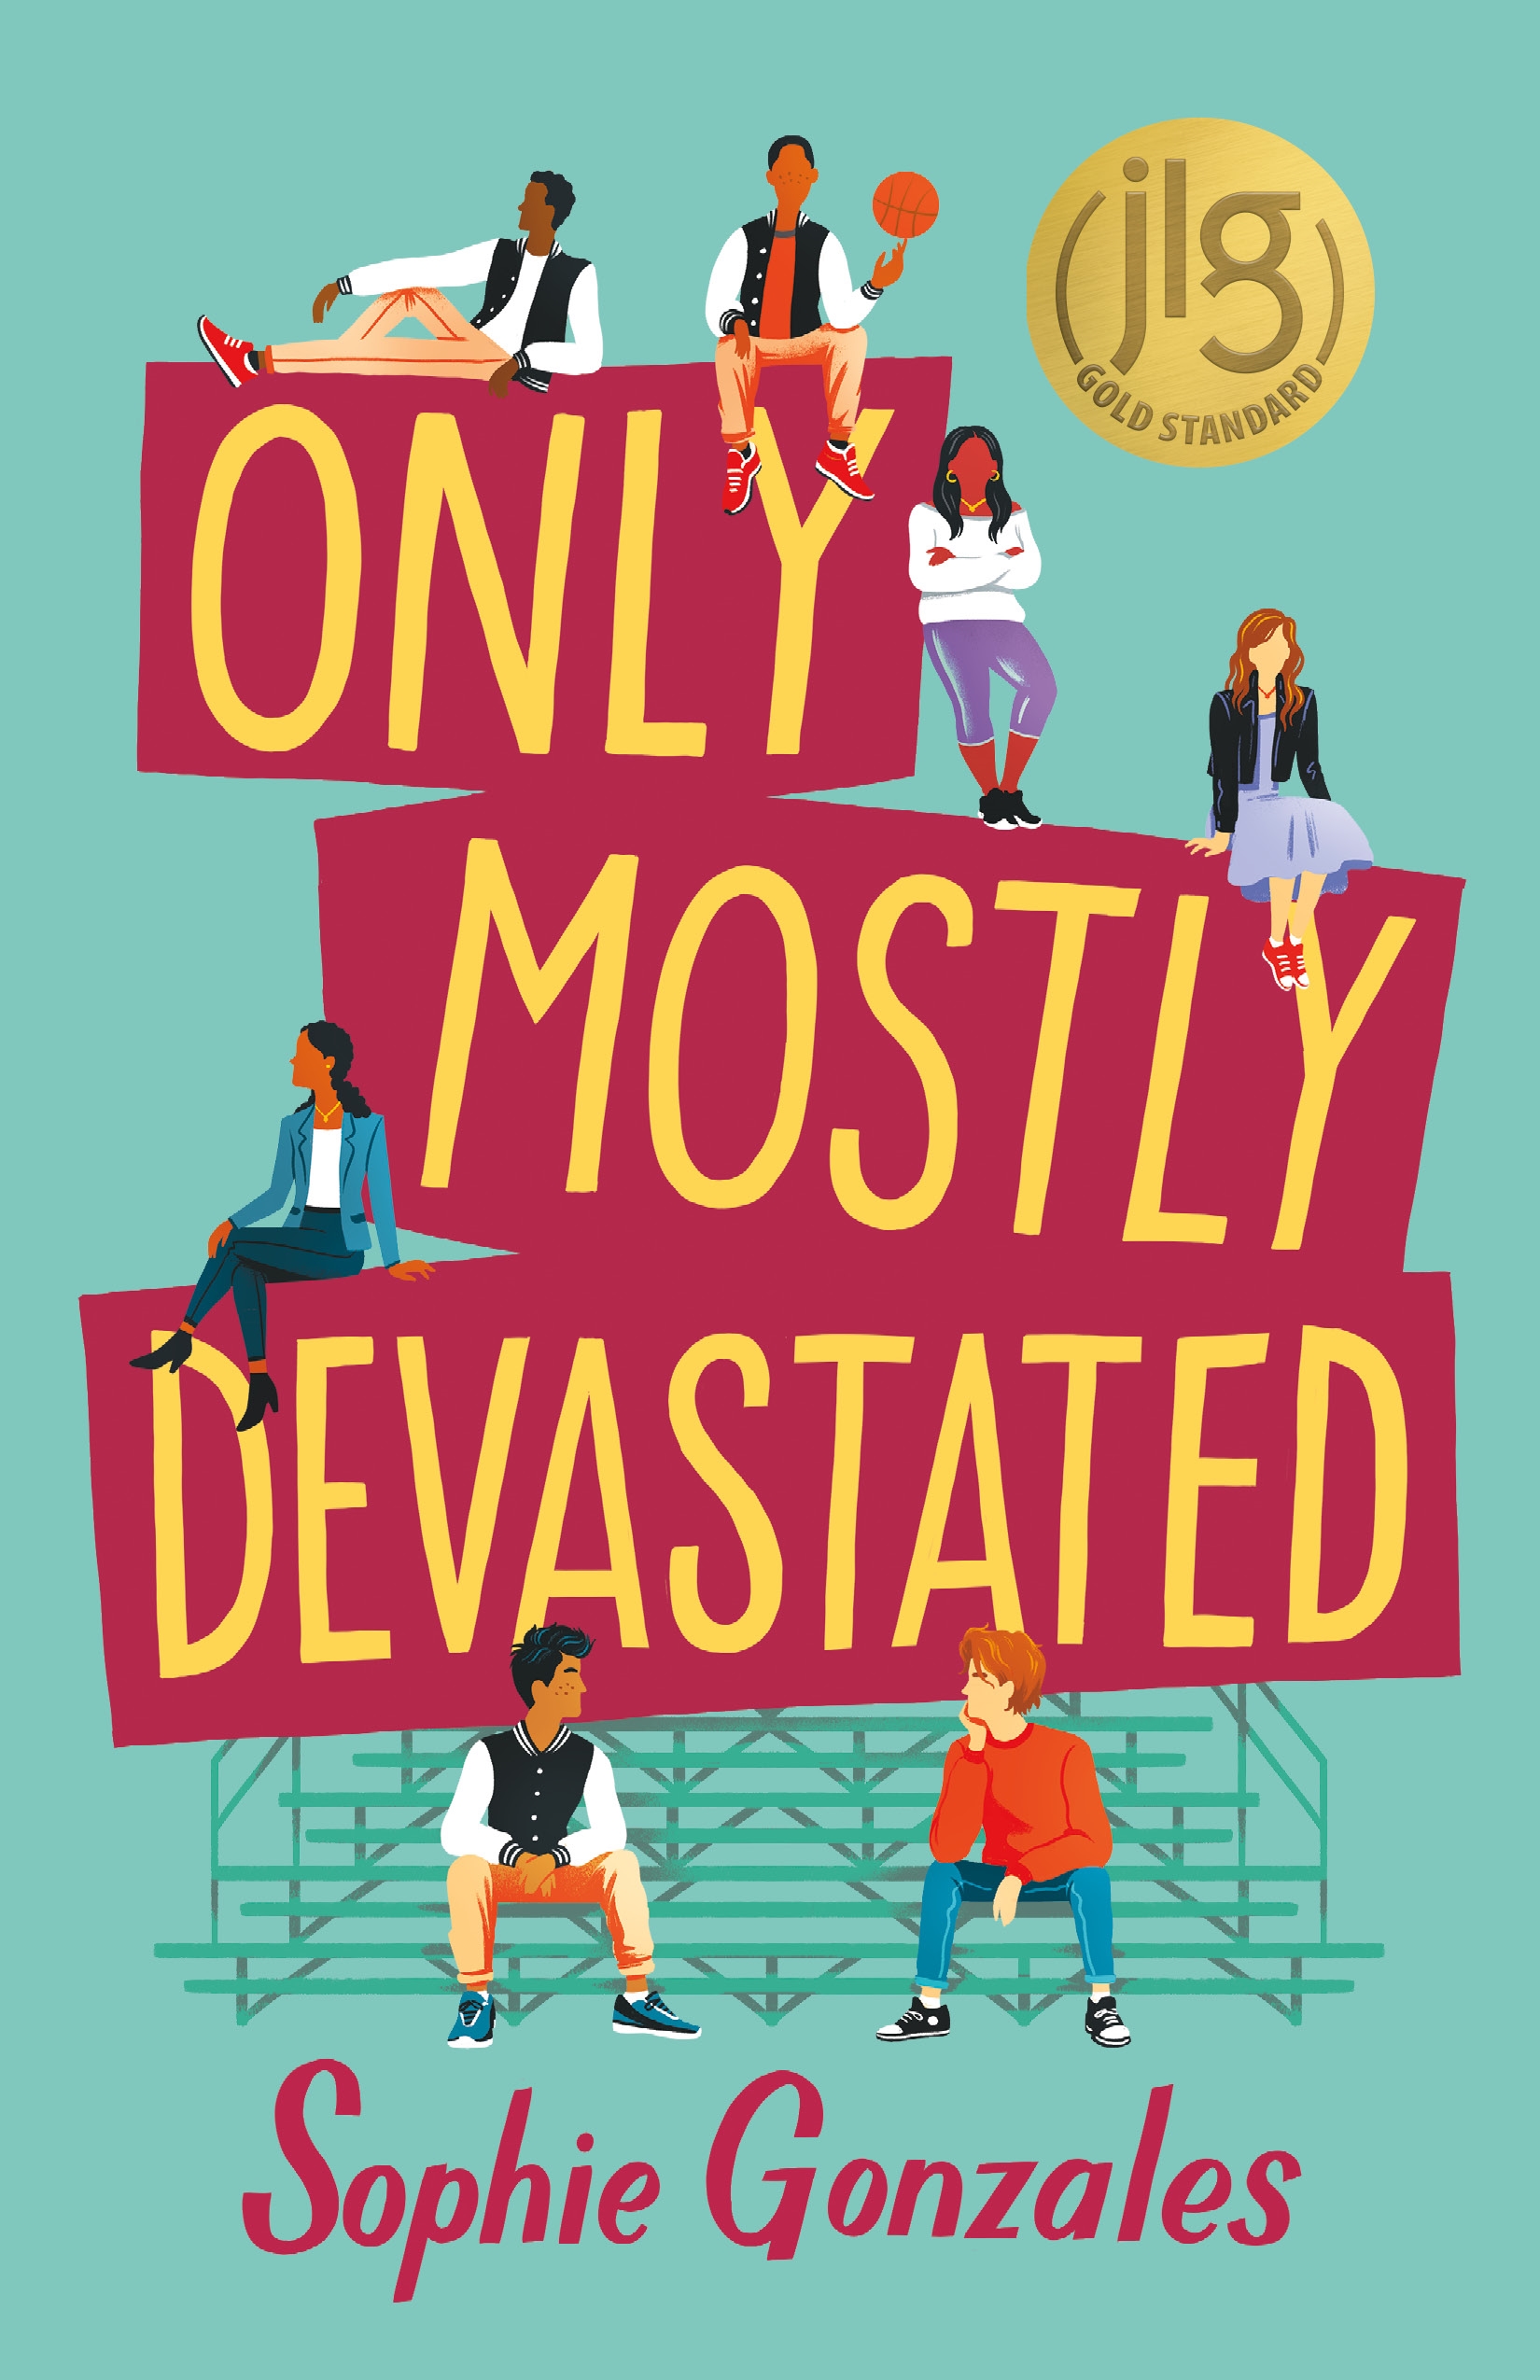 Book “Only Mostly Devastated” by Sophie Gonzales — March 3, 2020